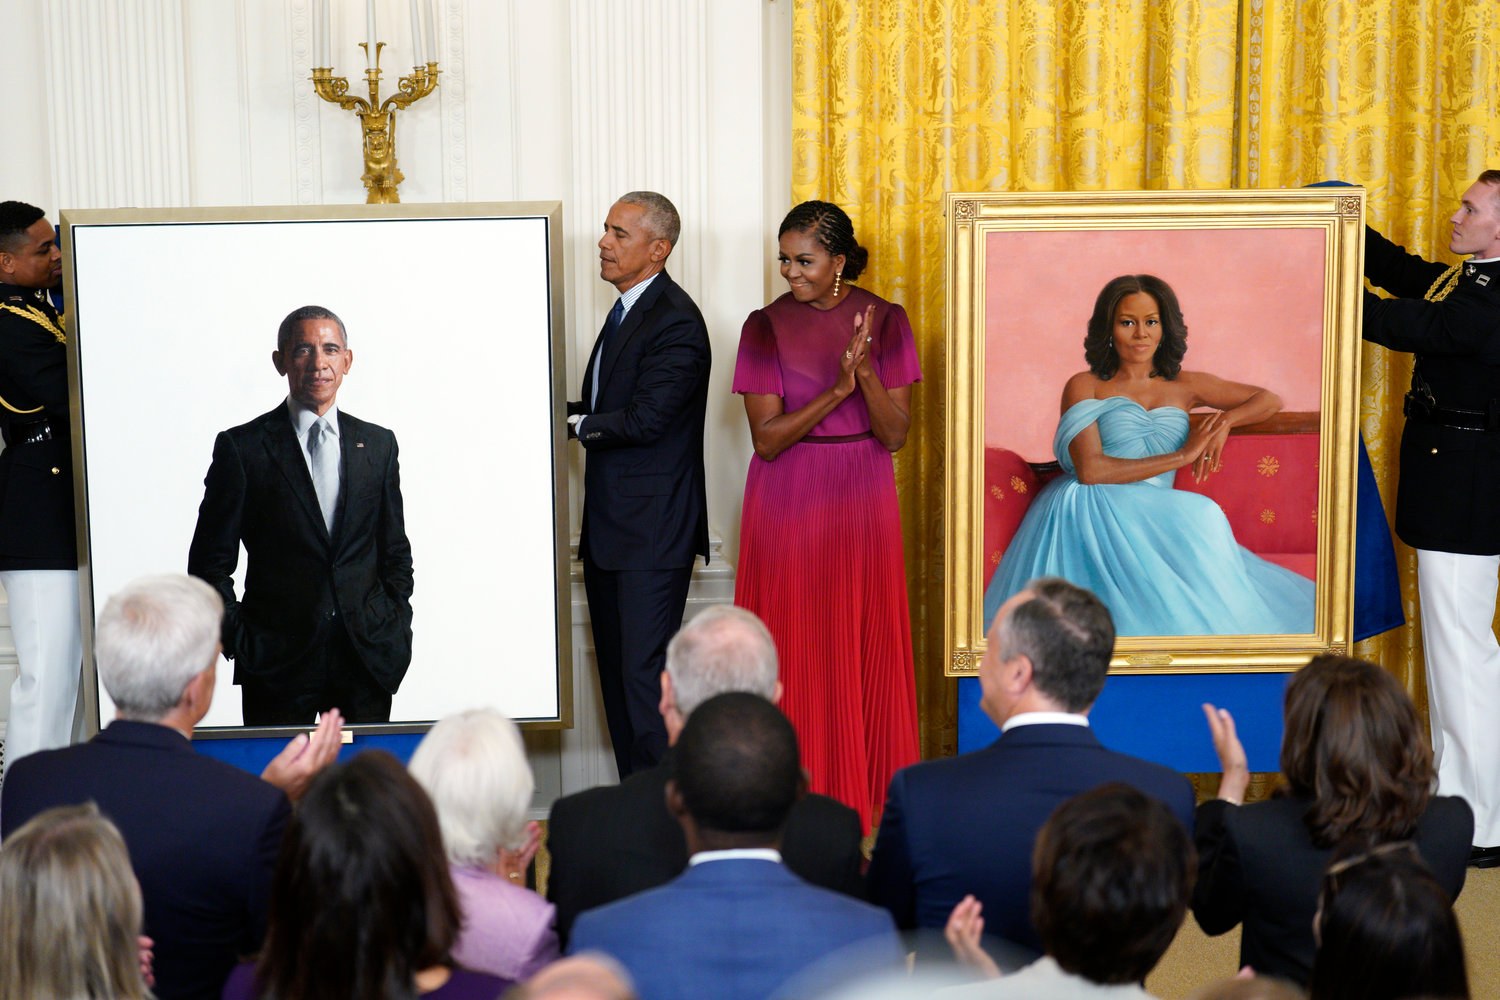 Former President Barack Obama and former first lady Michelle Obama unveil their official White House portraits during a ceremony with U.S. President Joe Biden in the East Room at the White House in Washington, D.C., on Wednesday, Sept. 7, 2022. (Yuri Gripas/Abaca Press/TNS)